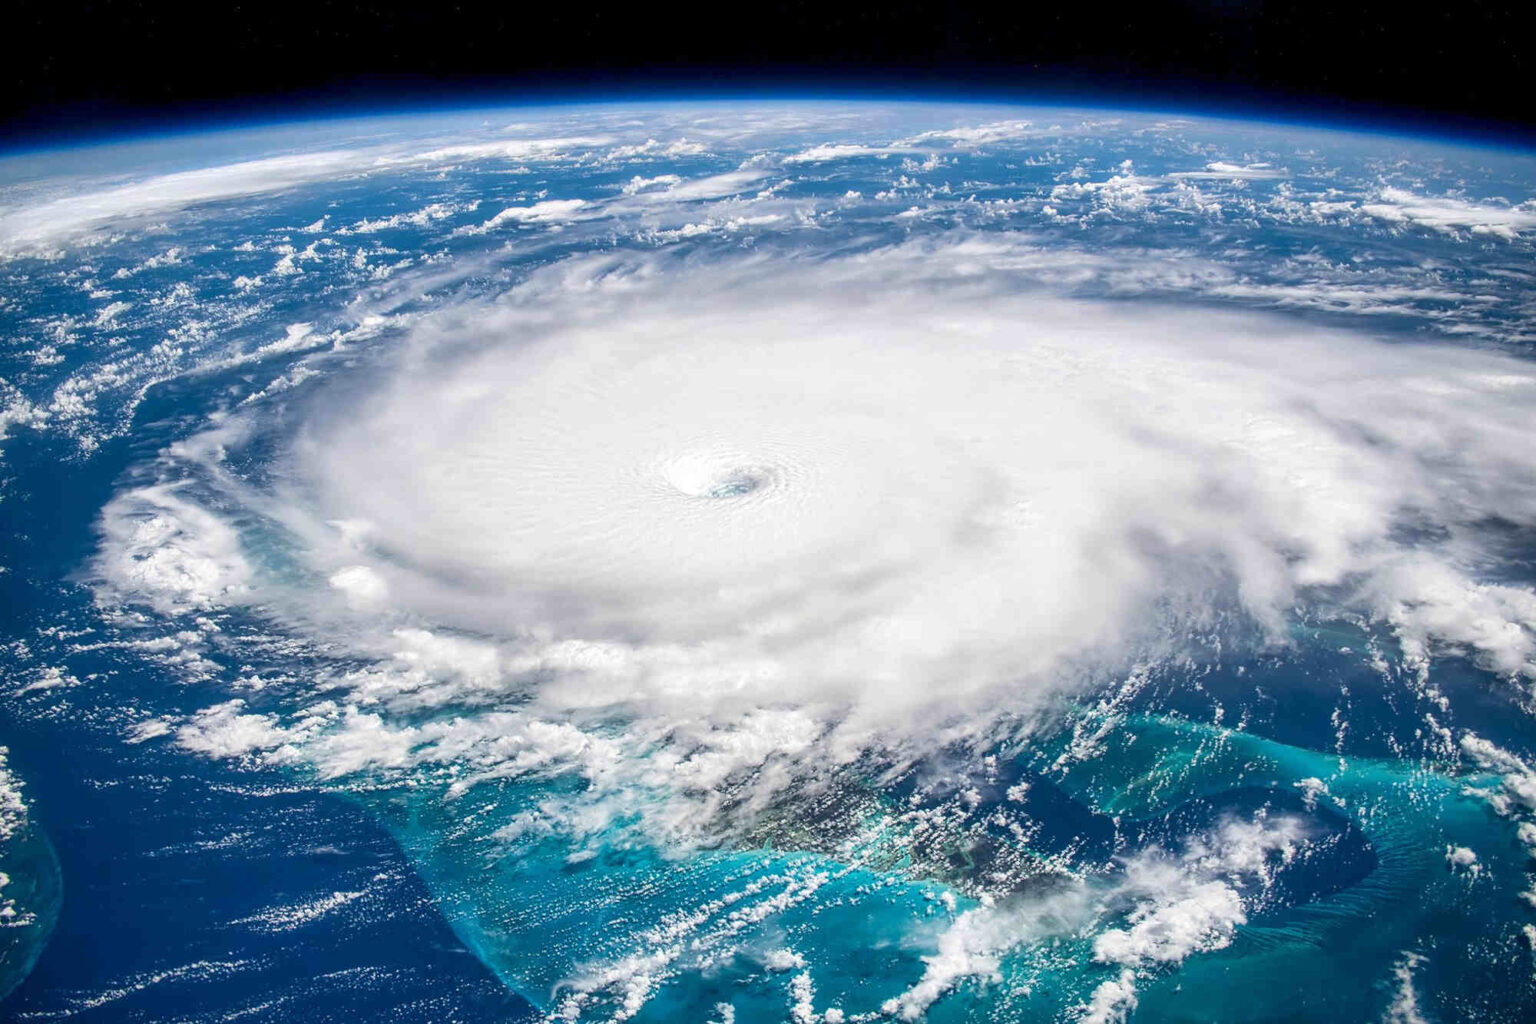 Are current storms already bigger than last year's? Discover why experts are predicting this year's hurricane season will be worse than usual.